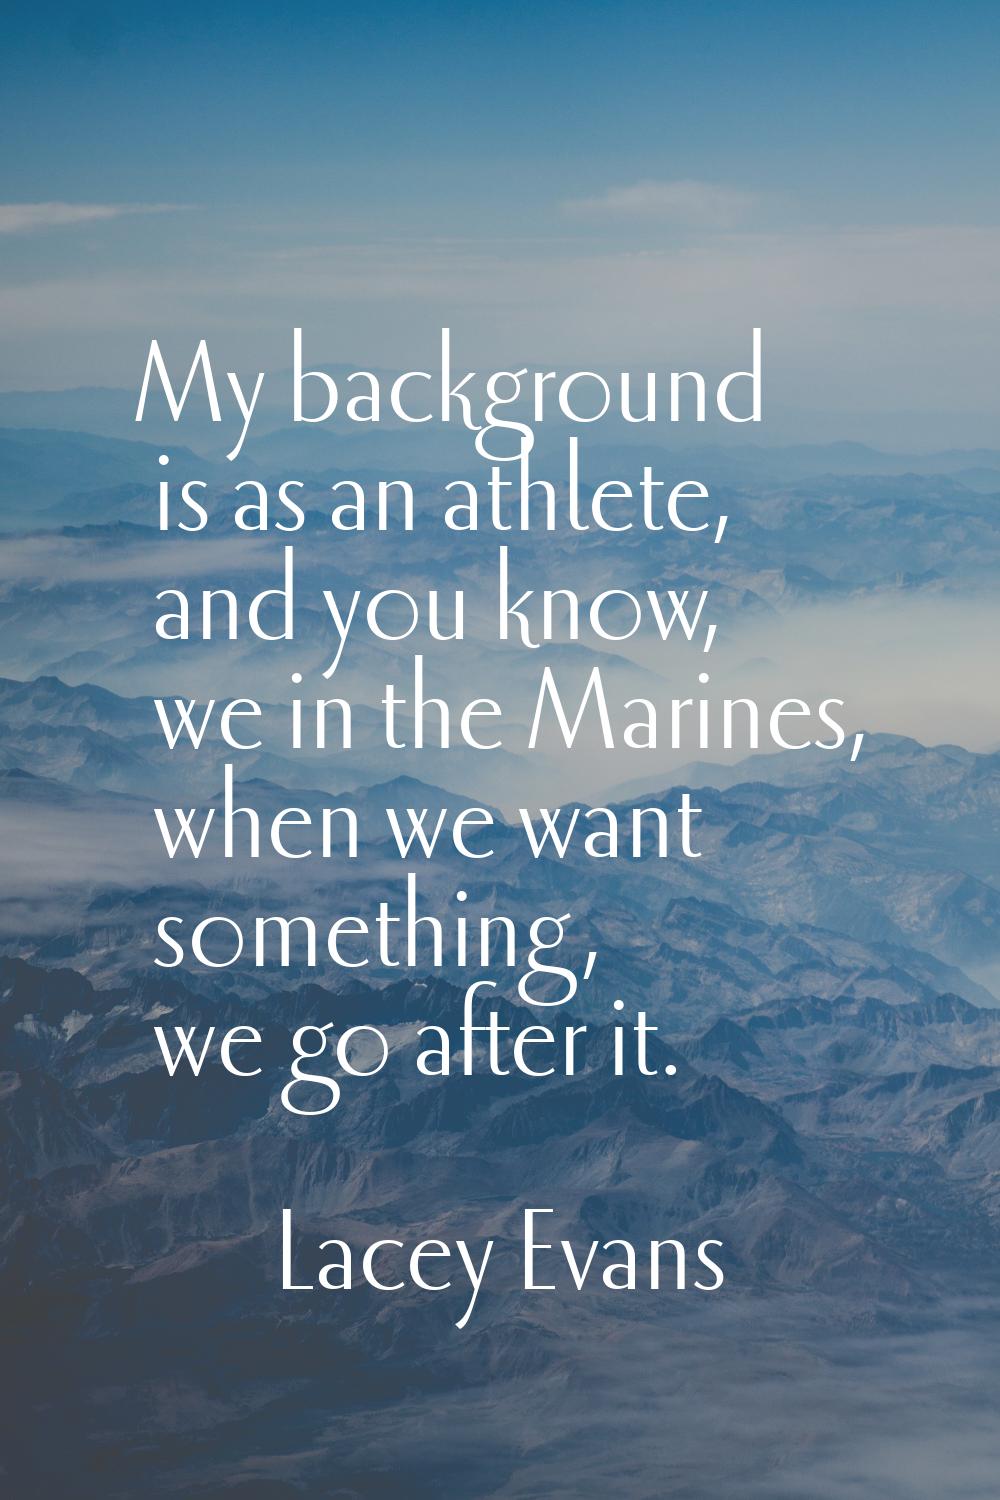 My background is as an athlete, and you know, we in the Marines, when we want something, we go afte